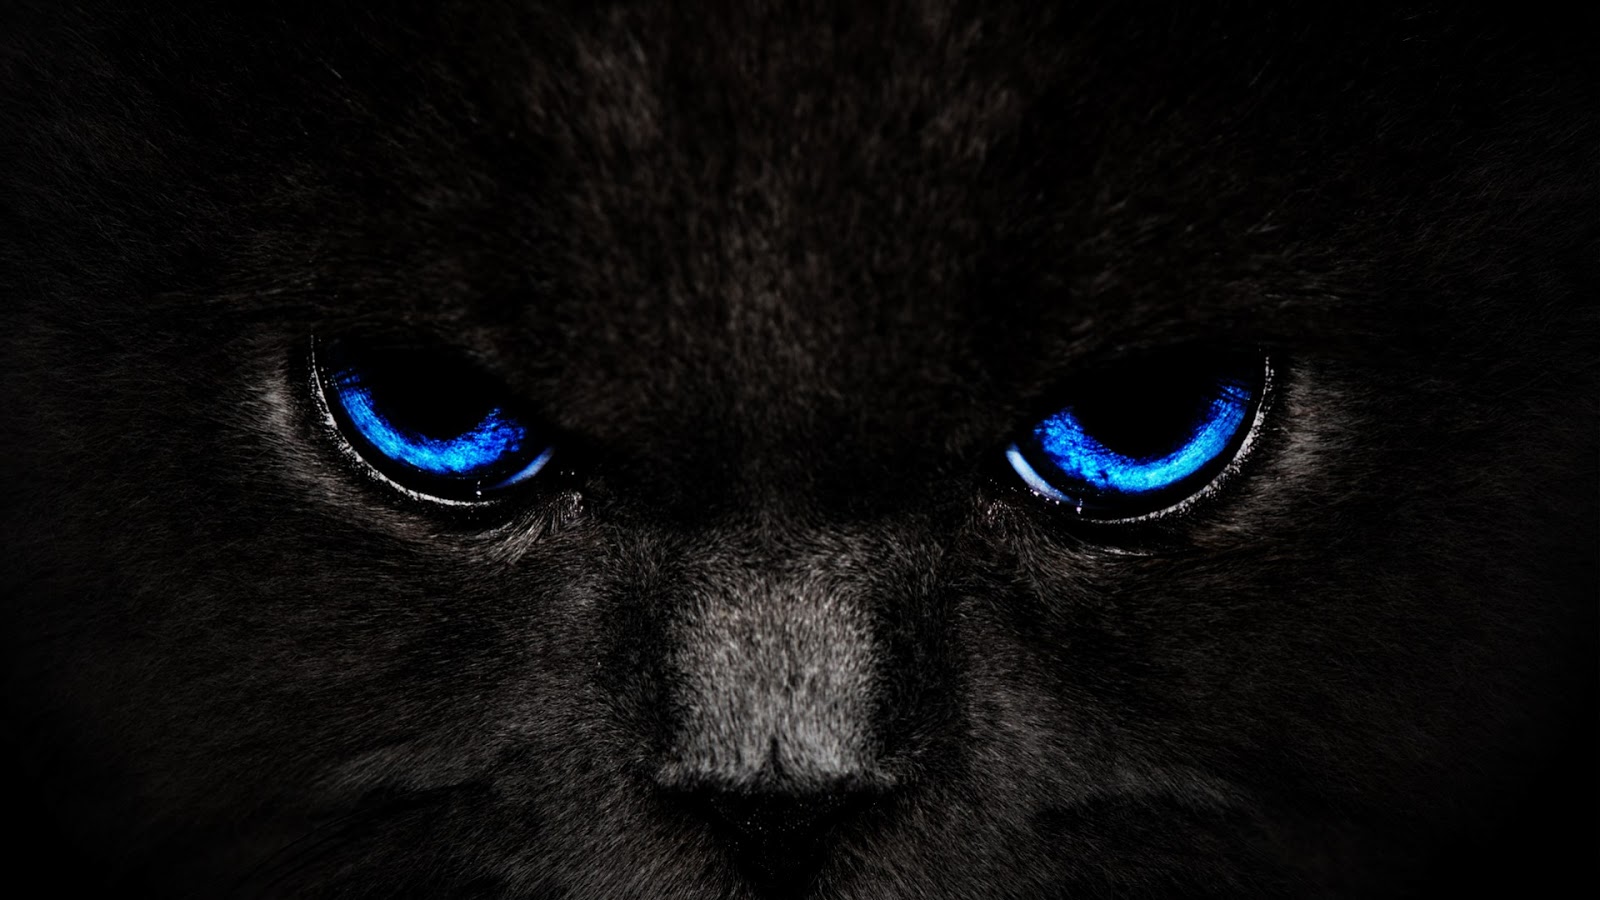  so get free download black cats wallpapers and make your desktop cool